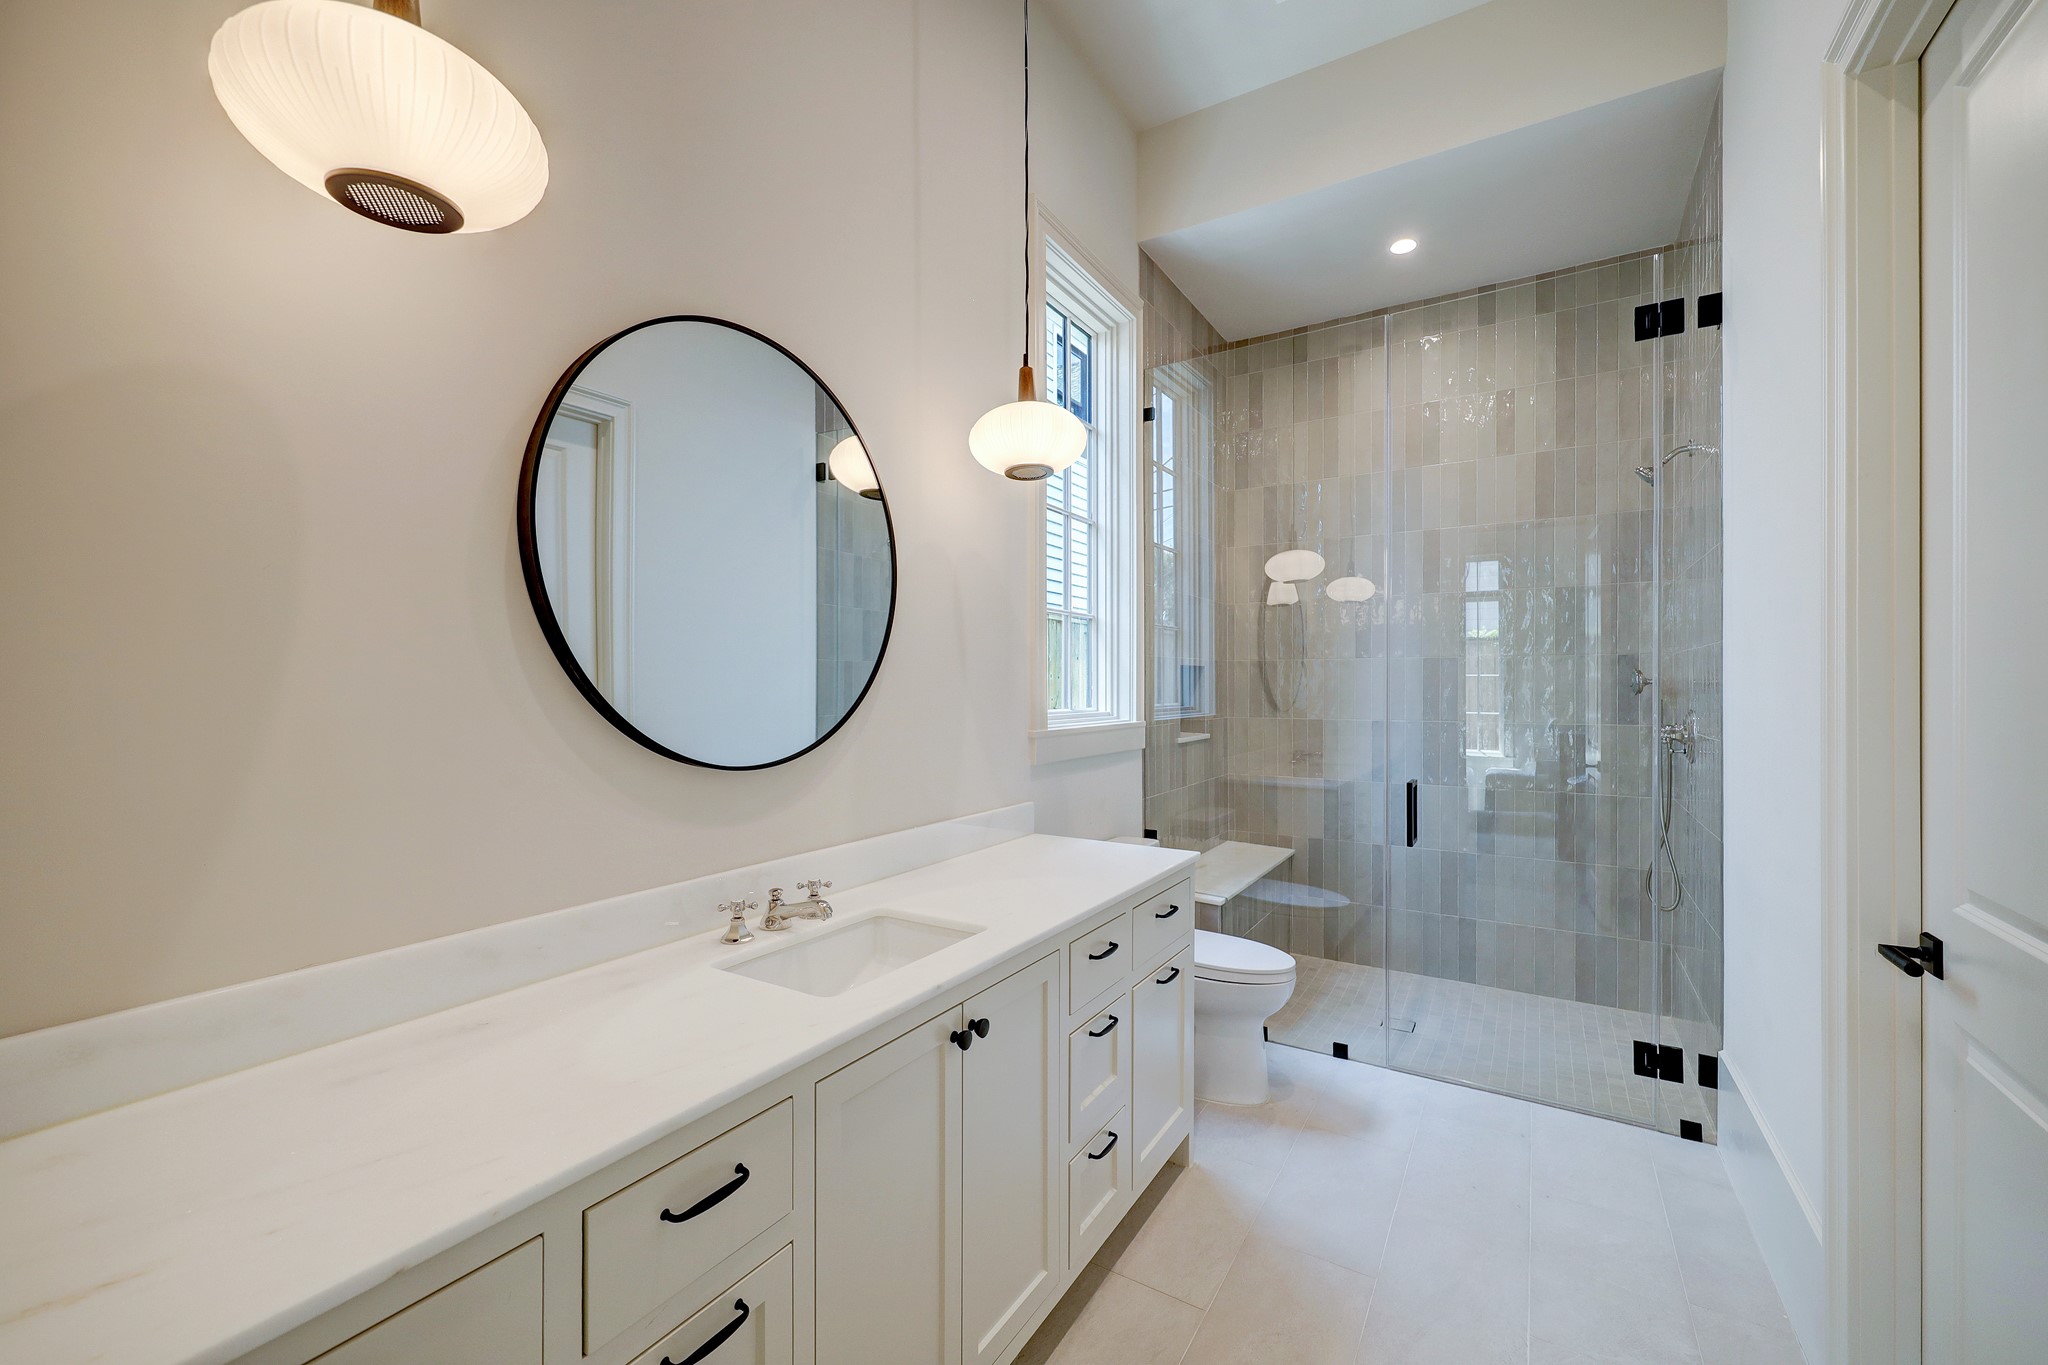 En suite bathroom to the first floor guest bedroom offers a walk-in shower with ceramic tile, bench seat and seamless glass door. Designer pendants illuminate the space.